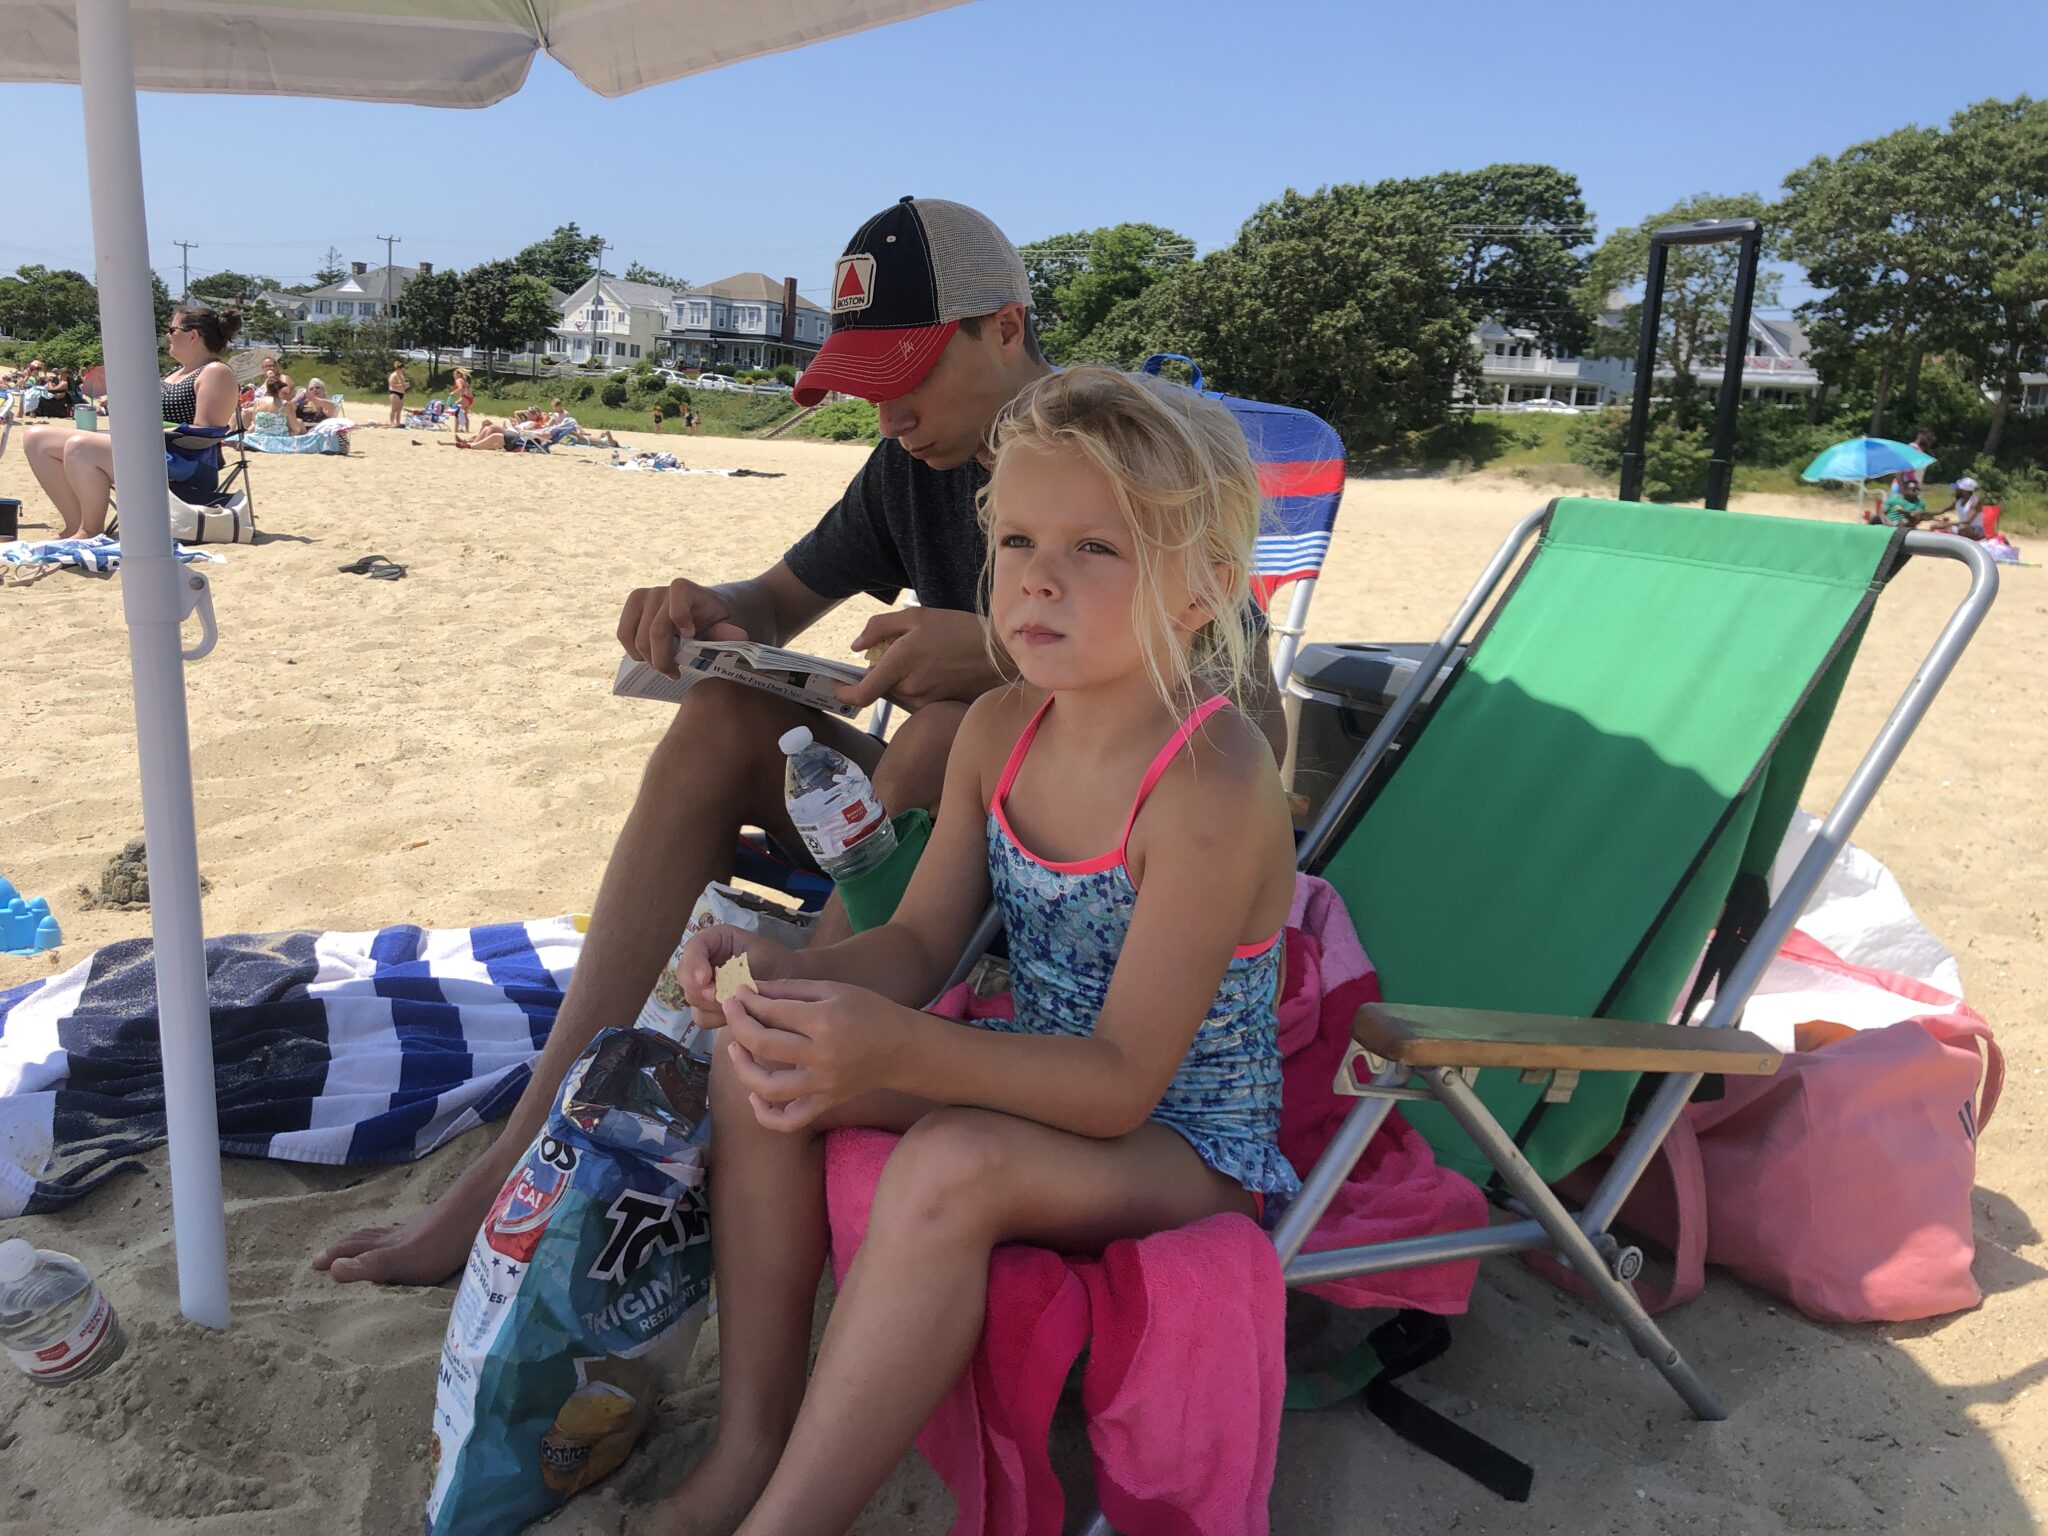 Cape Cod Beaches: Best Family Beaches - Stylish Life for Moms